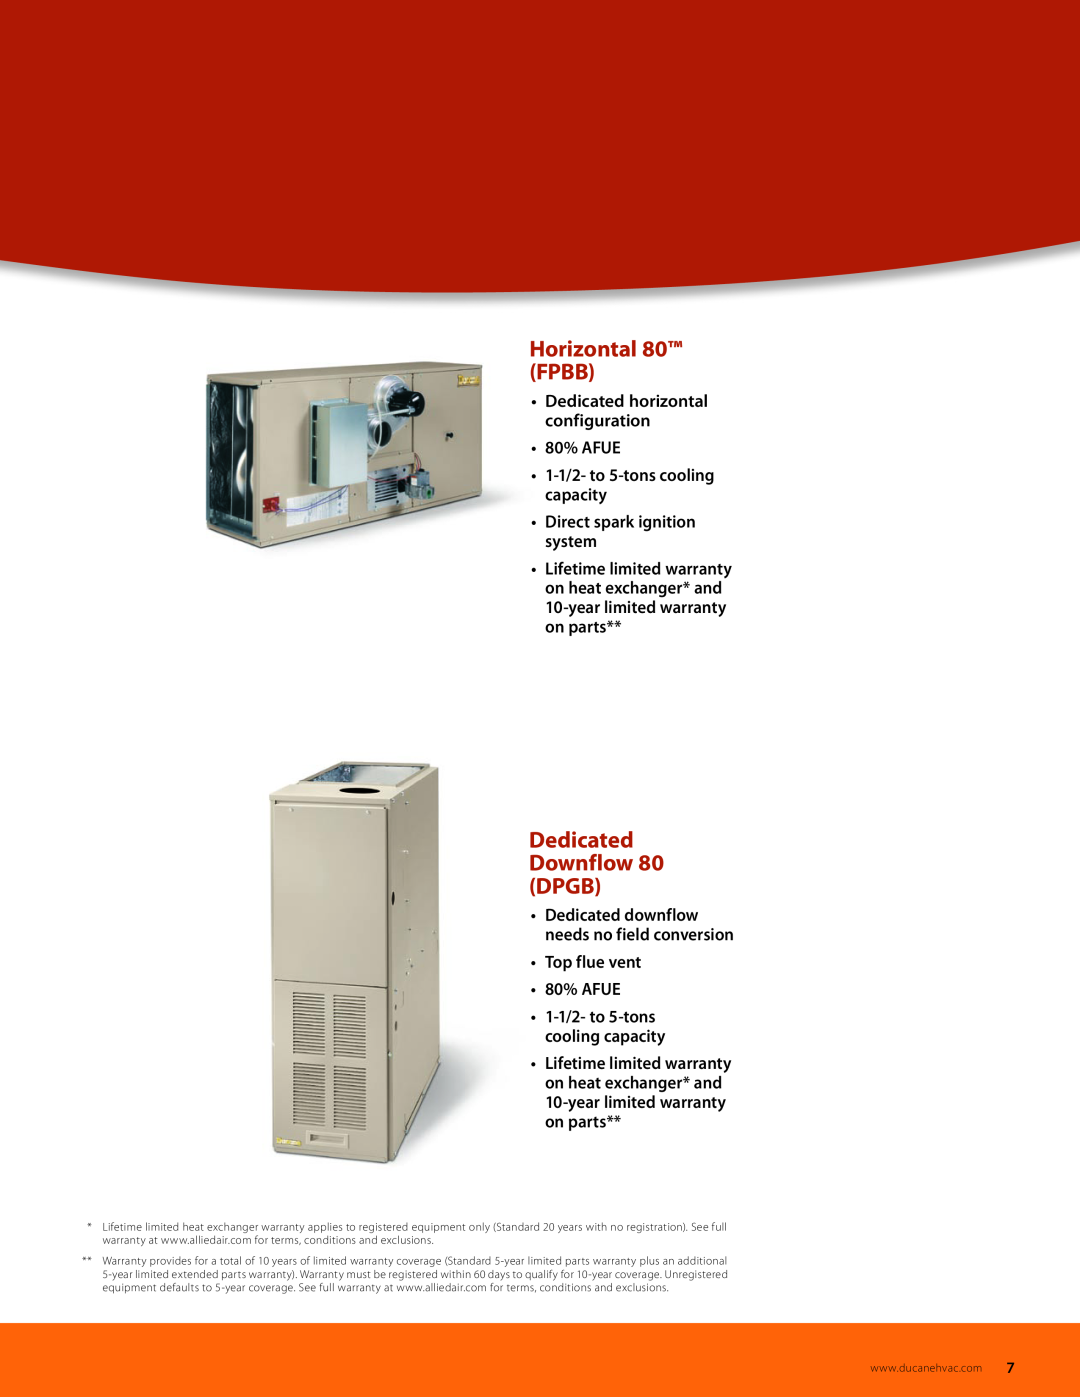 Ducane (HVAC) Air Conditioning and Heating Horizontal 80 FPBB, Dedicated Downflow 80 DPGB, Direct spark ignition system 